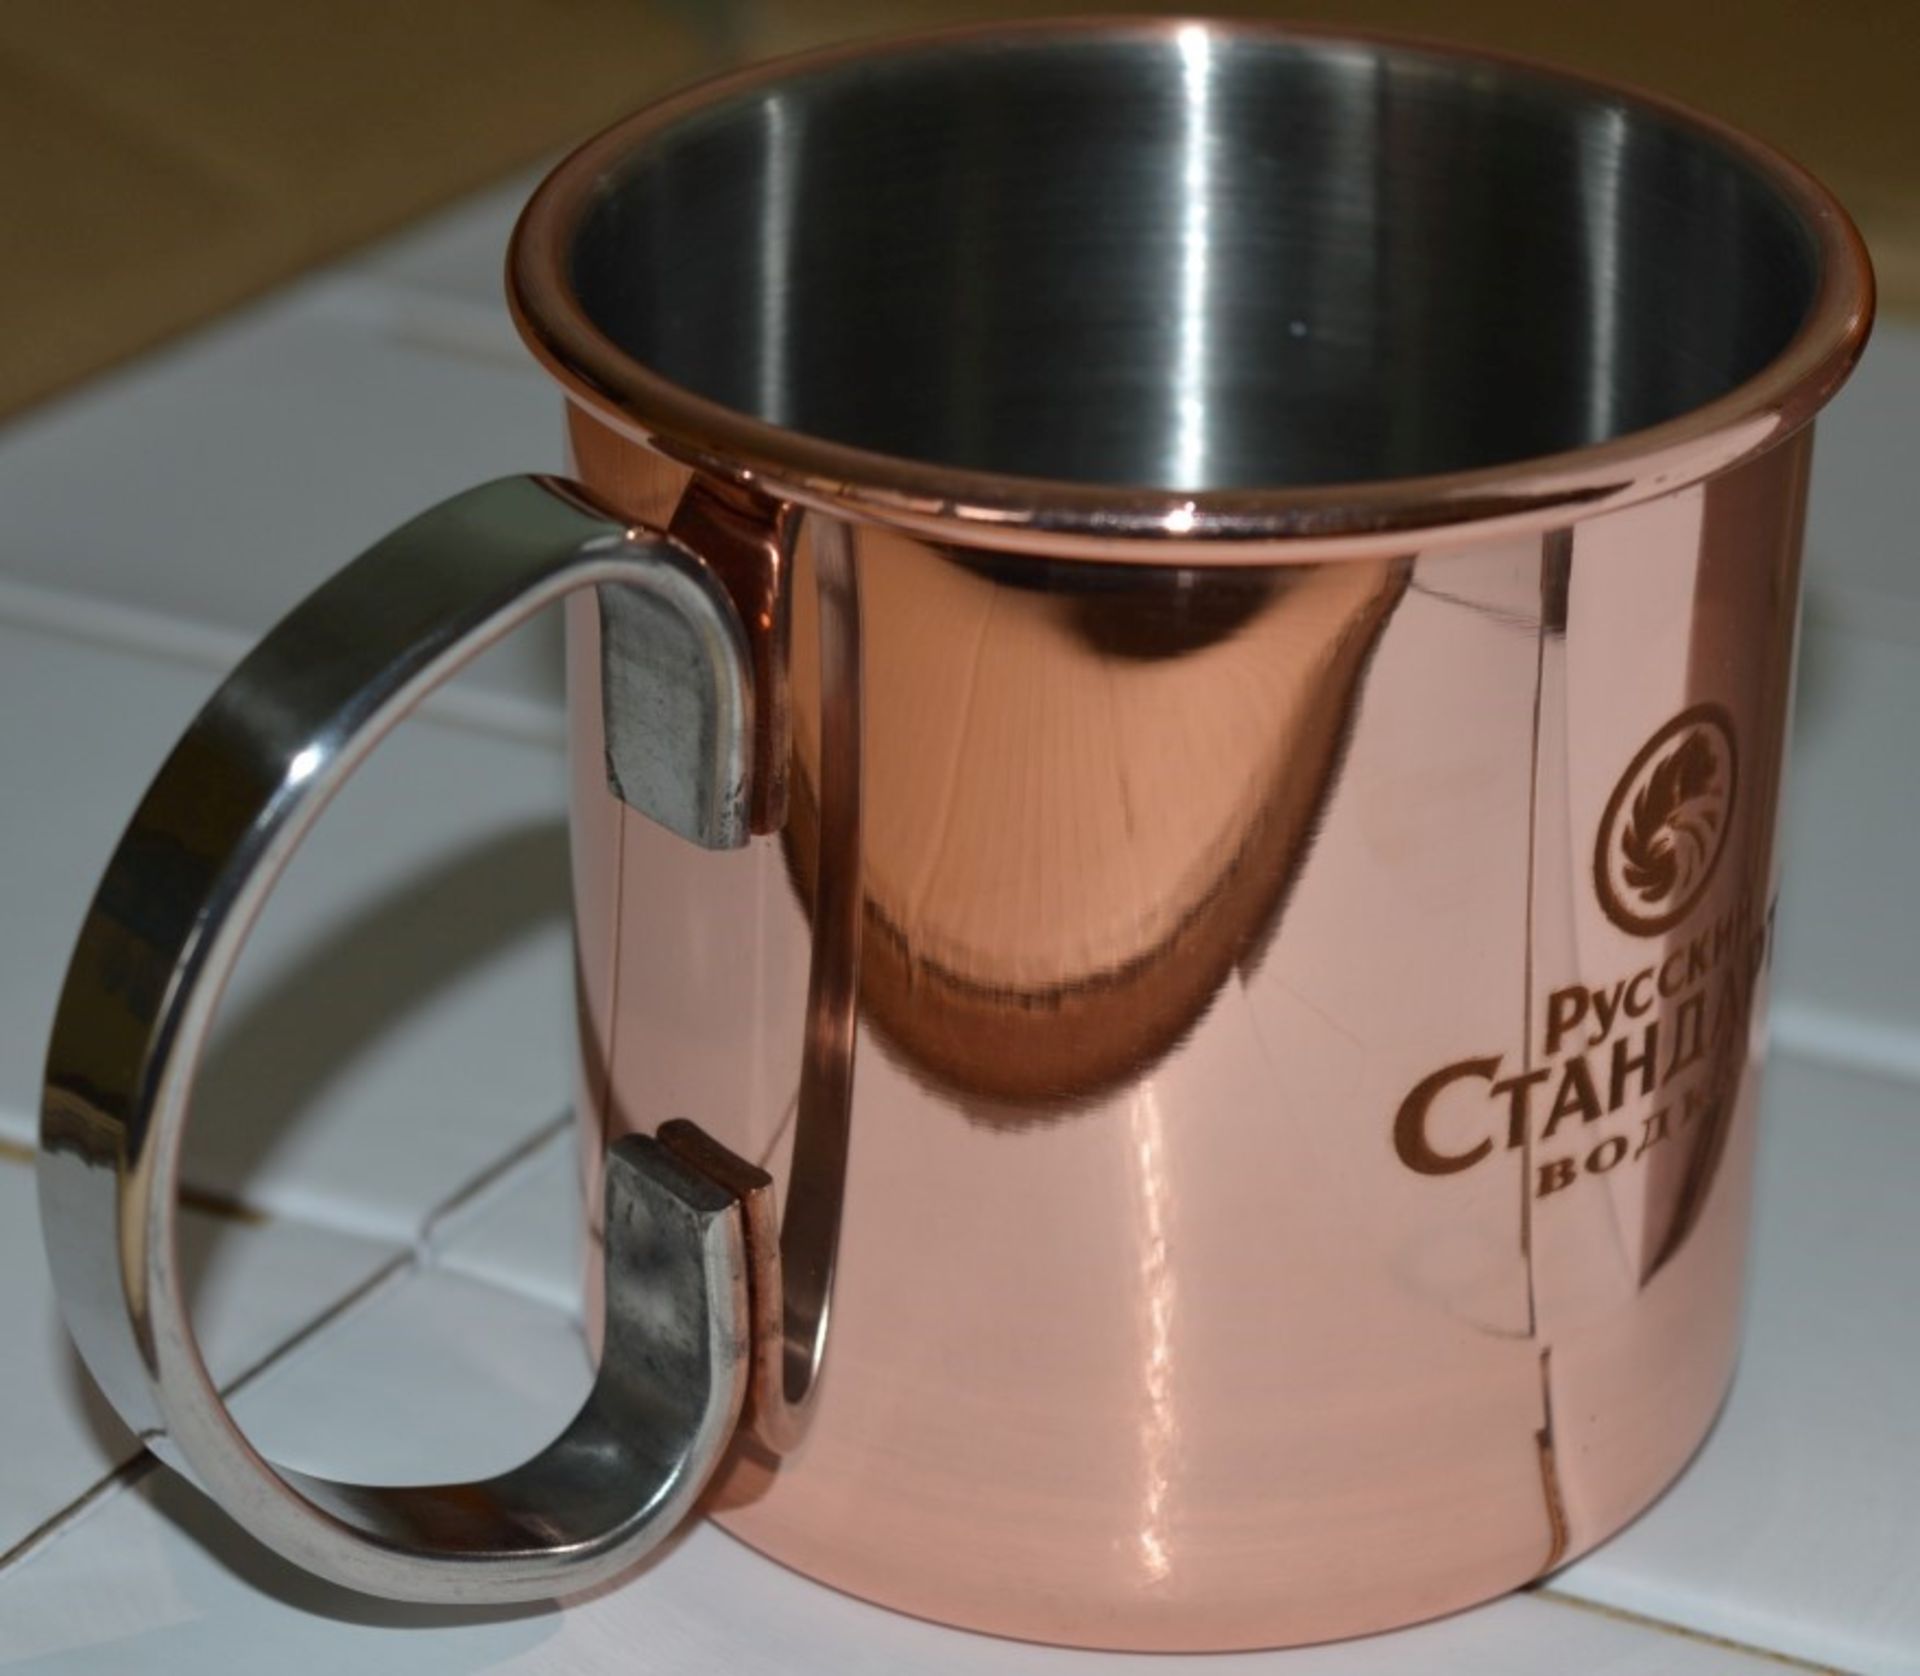 48 x Russian Standard Vodka Copper Mugs - Brand New Boxed Promotional Stock - CL090 - Ref BL058 US - - Image 6 of 8